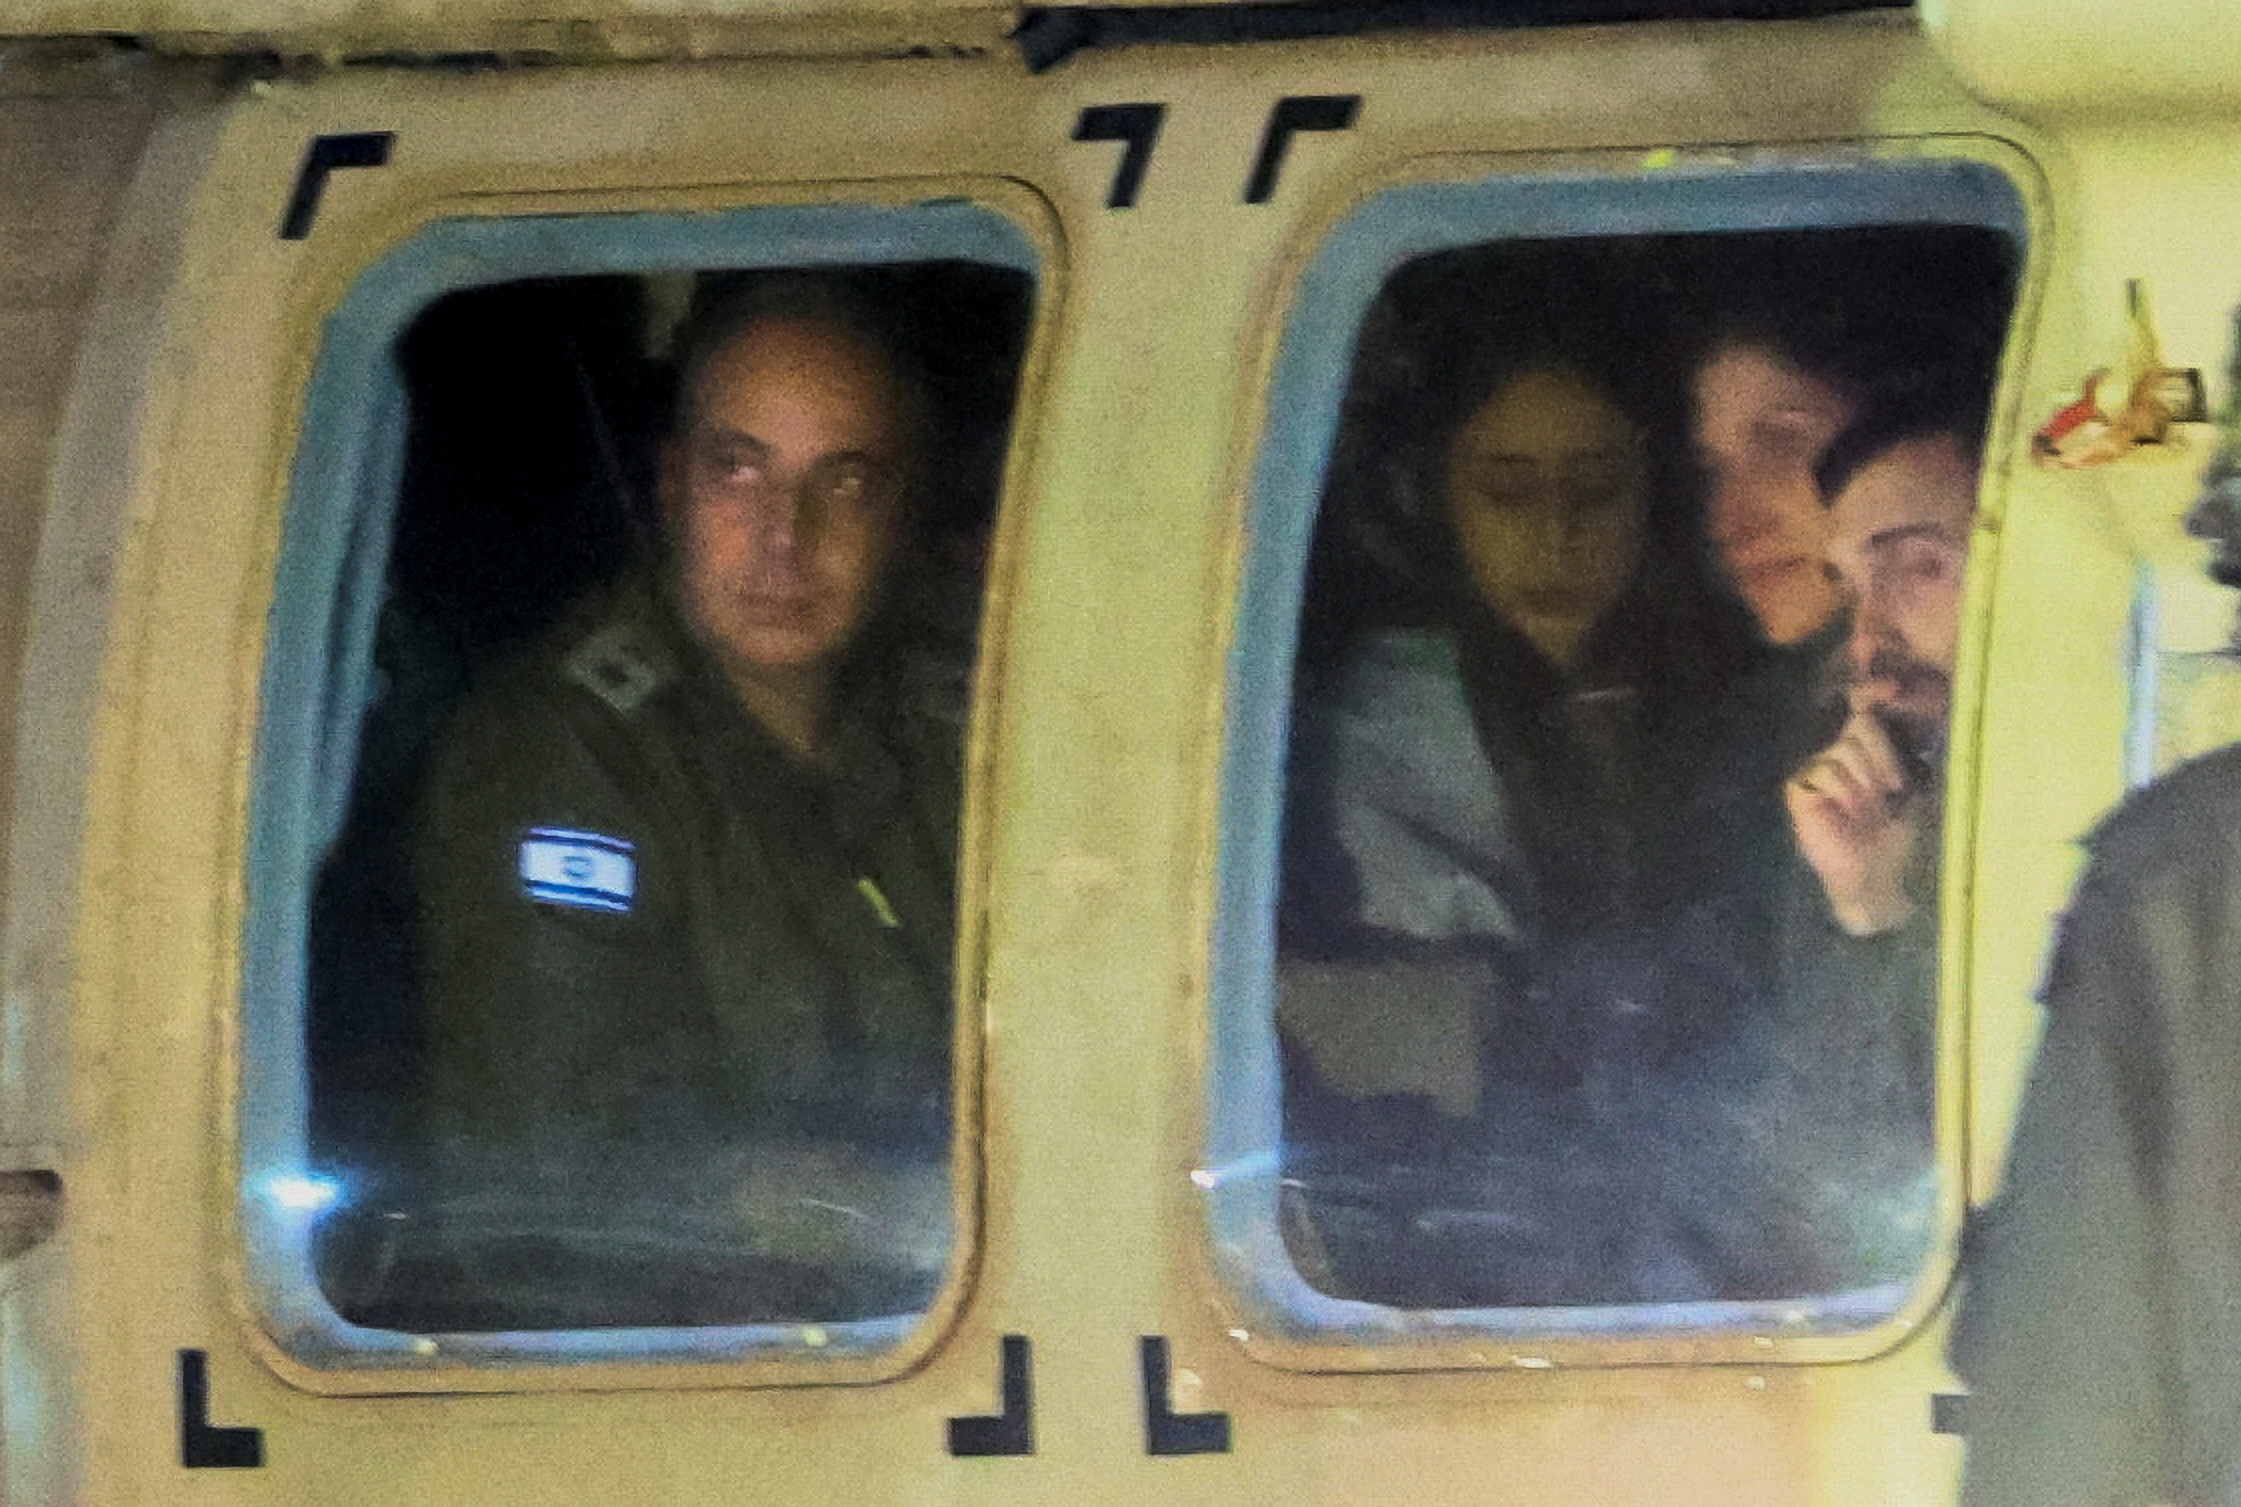 Hostages are released as part of a deal between Israel and Palestinian Islamist group Hamas